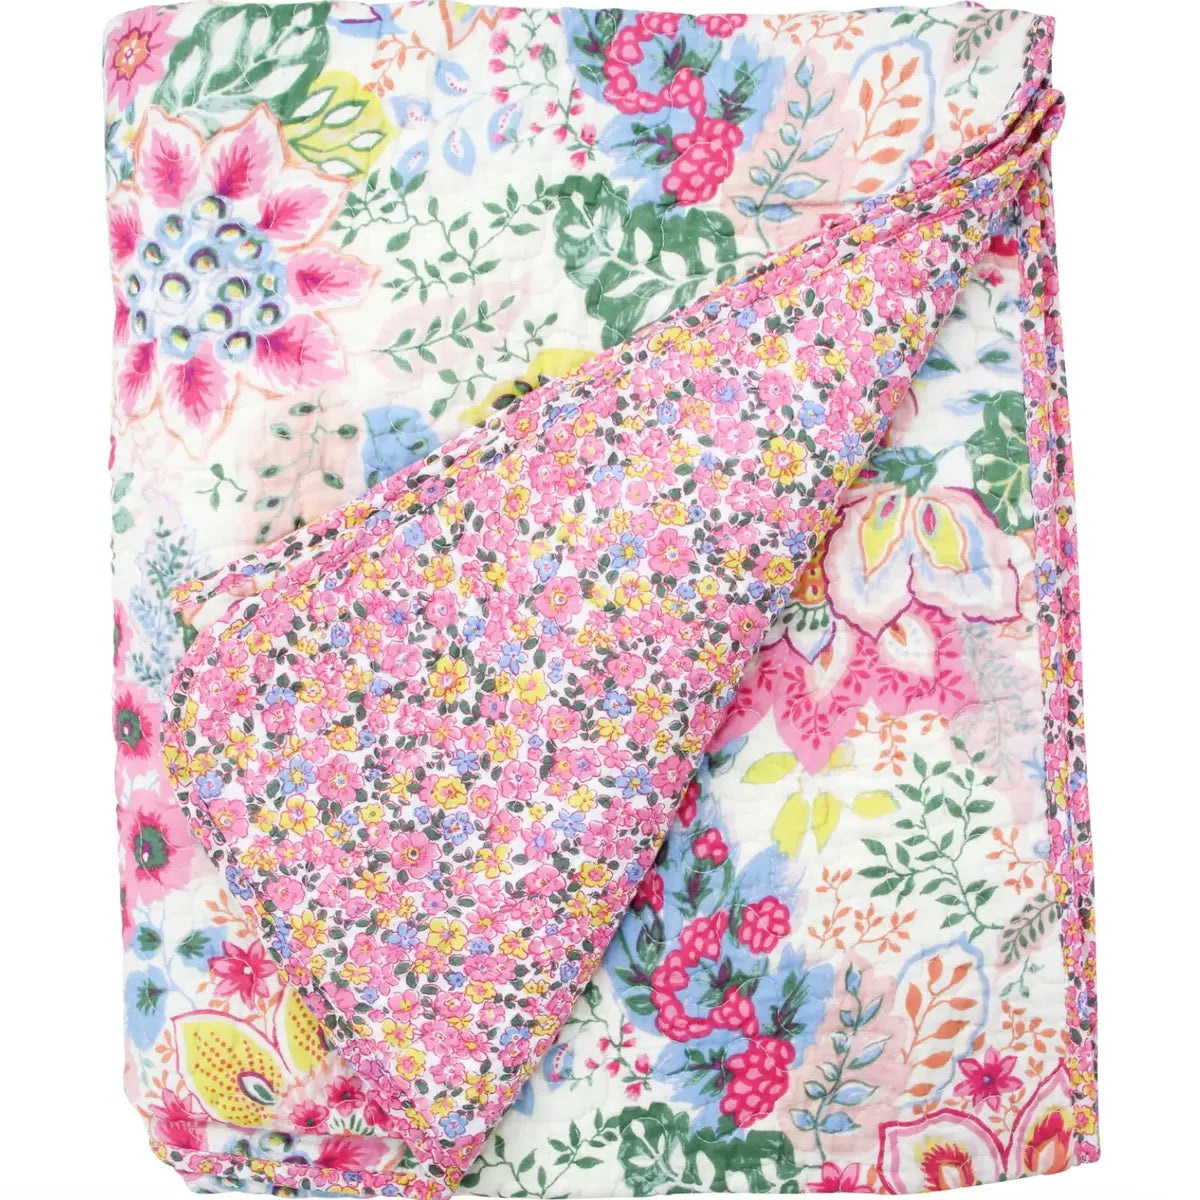 A LaVida Quilted Bedspread - Springtime with a floral pattern folded on top of a white background.